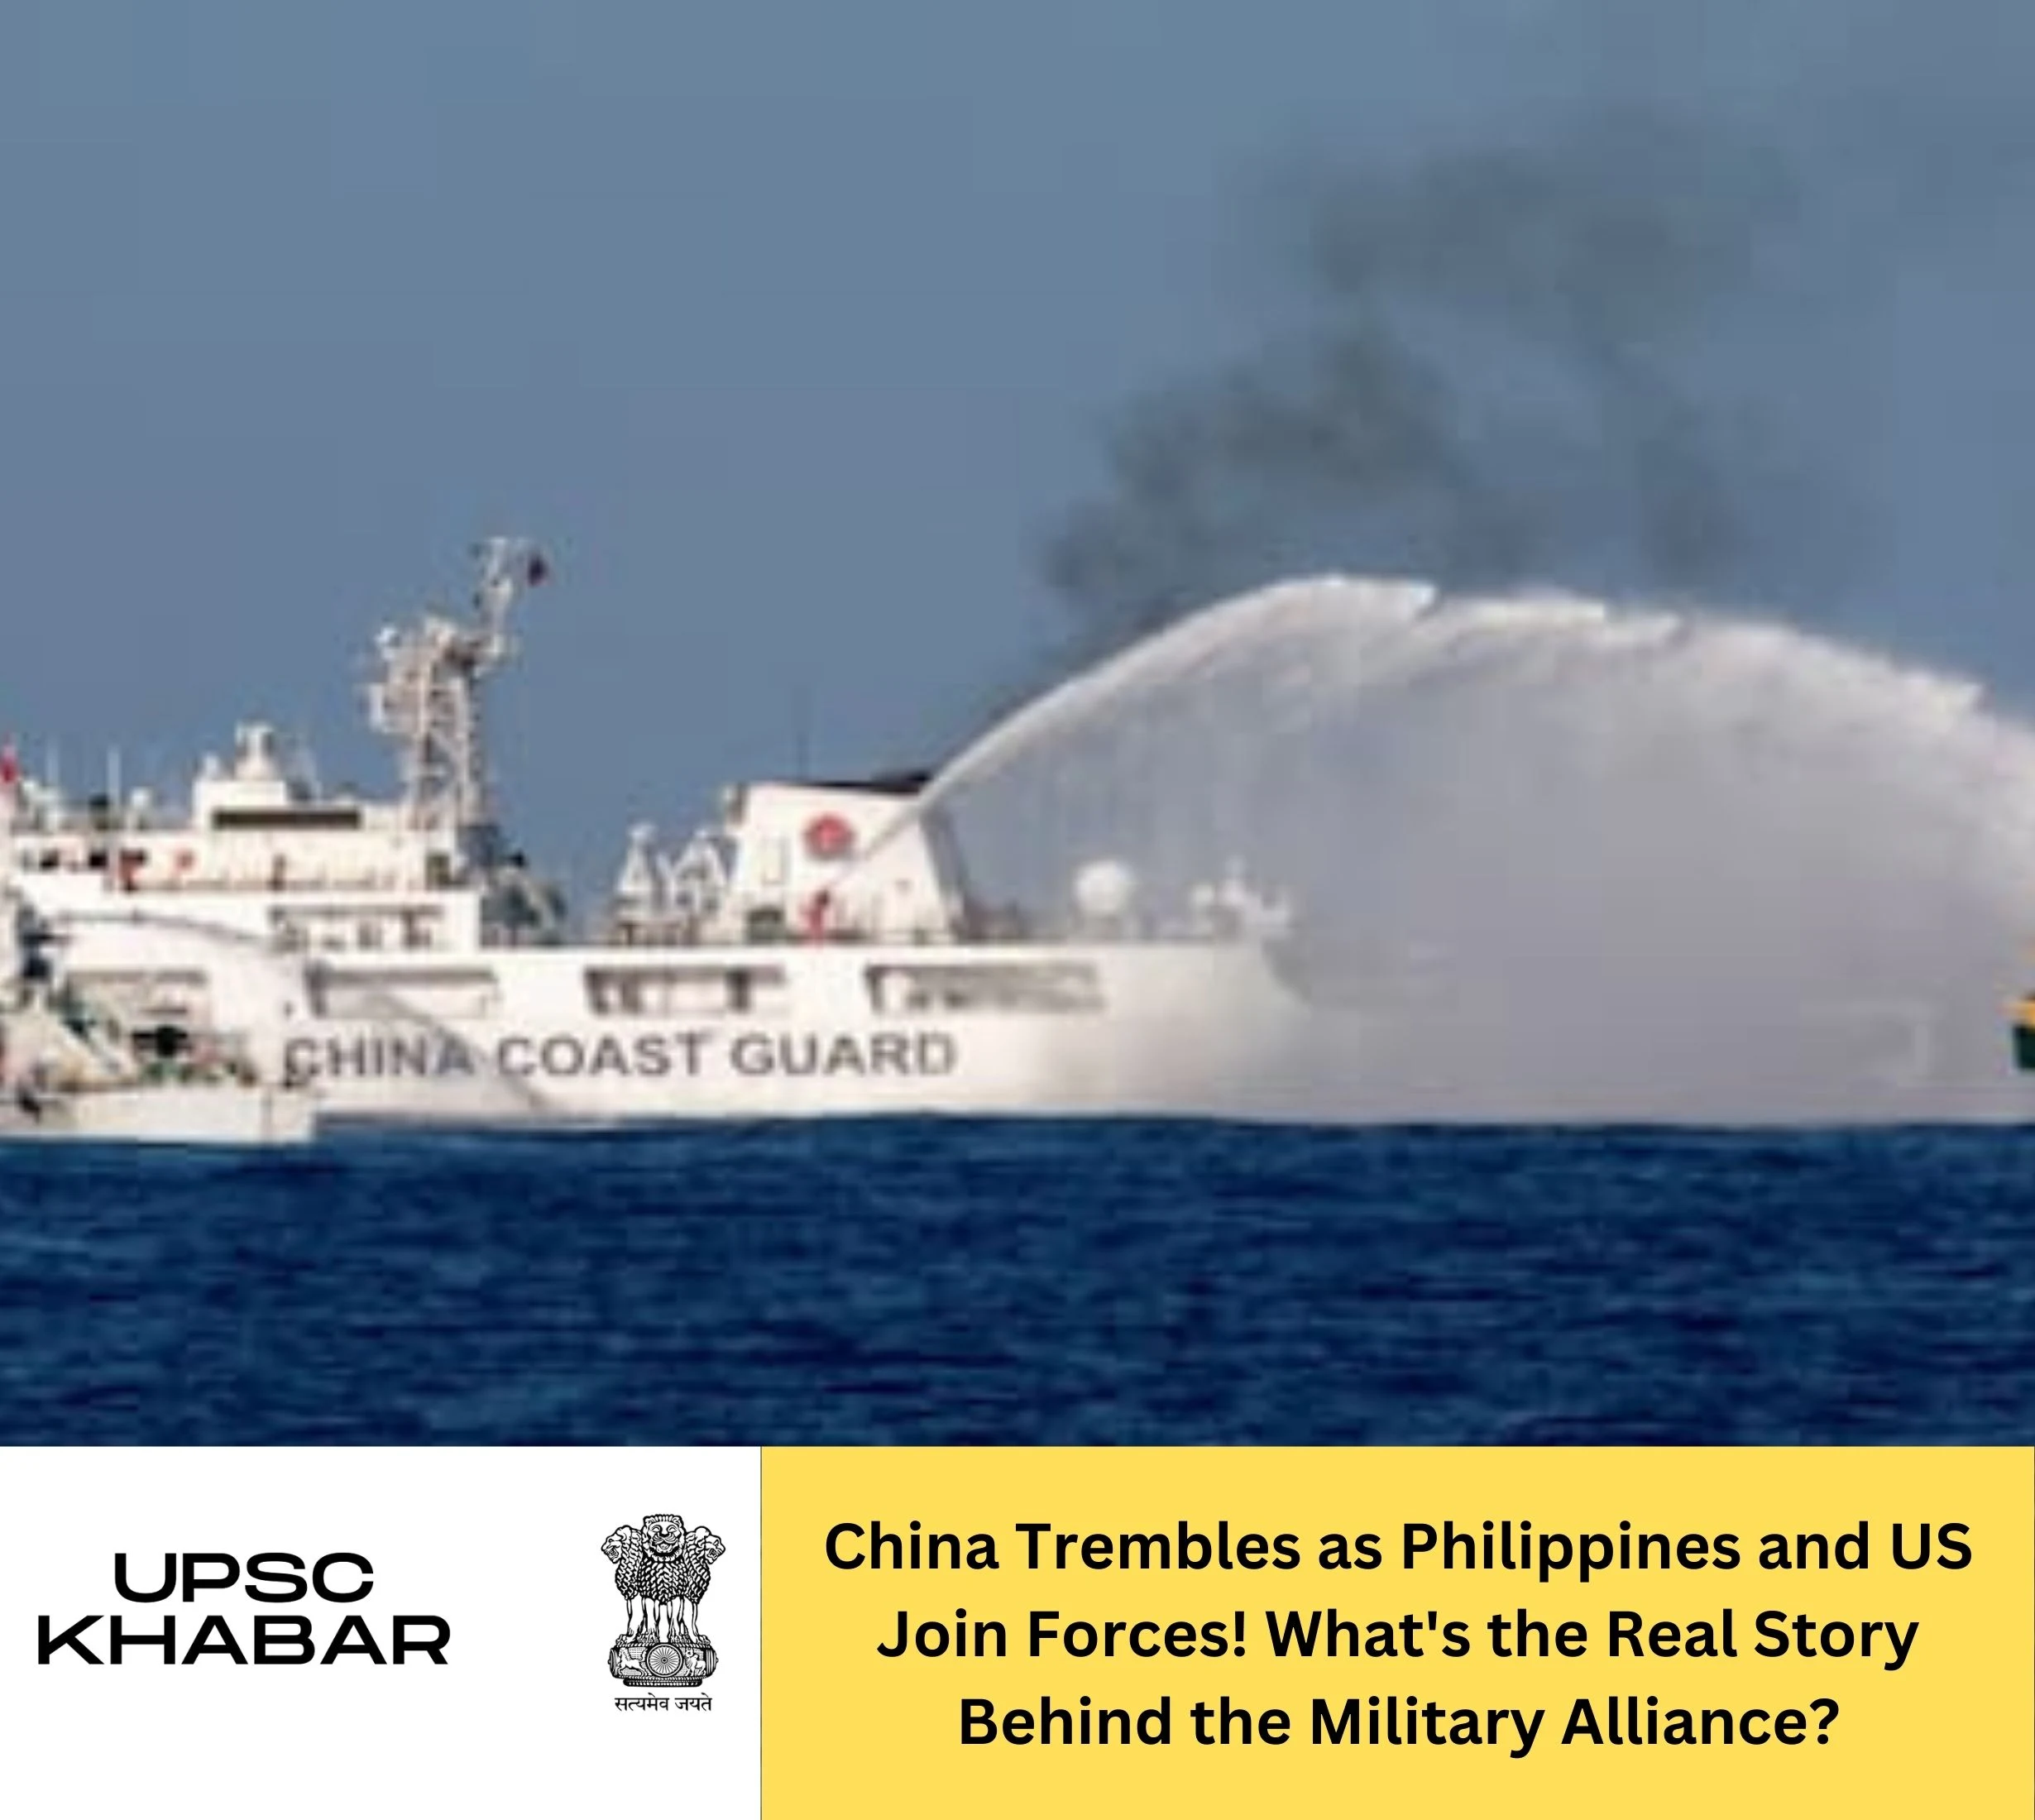 China Trembles as Philippines and US Join Forces! What's the Real Story Behind the Military Alliance?